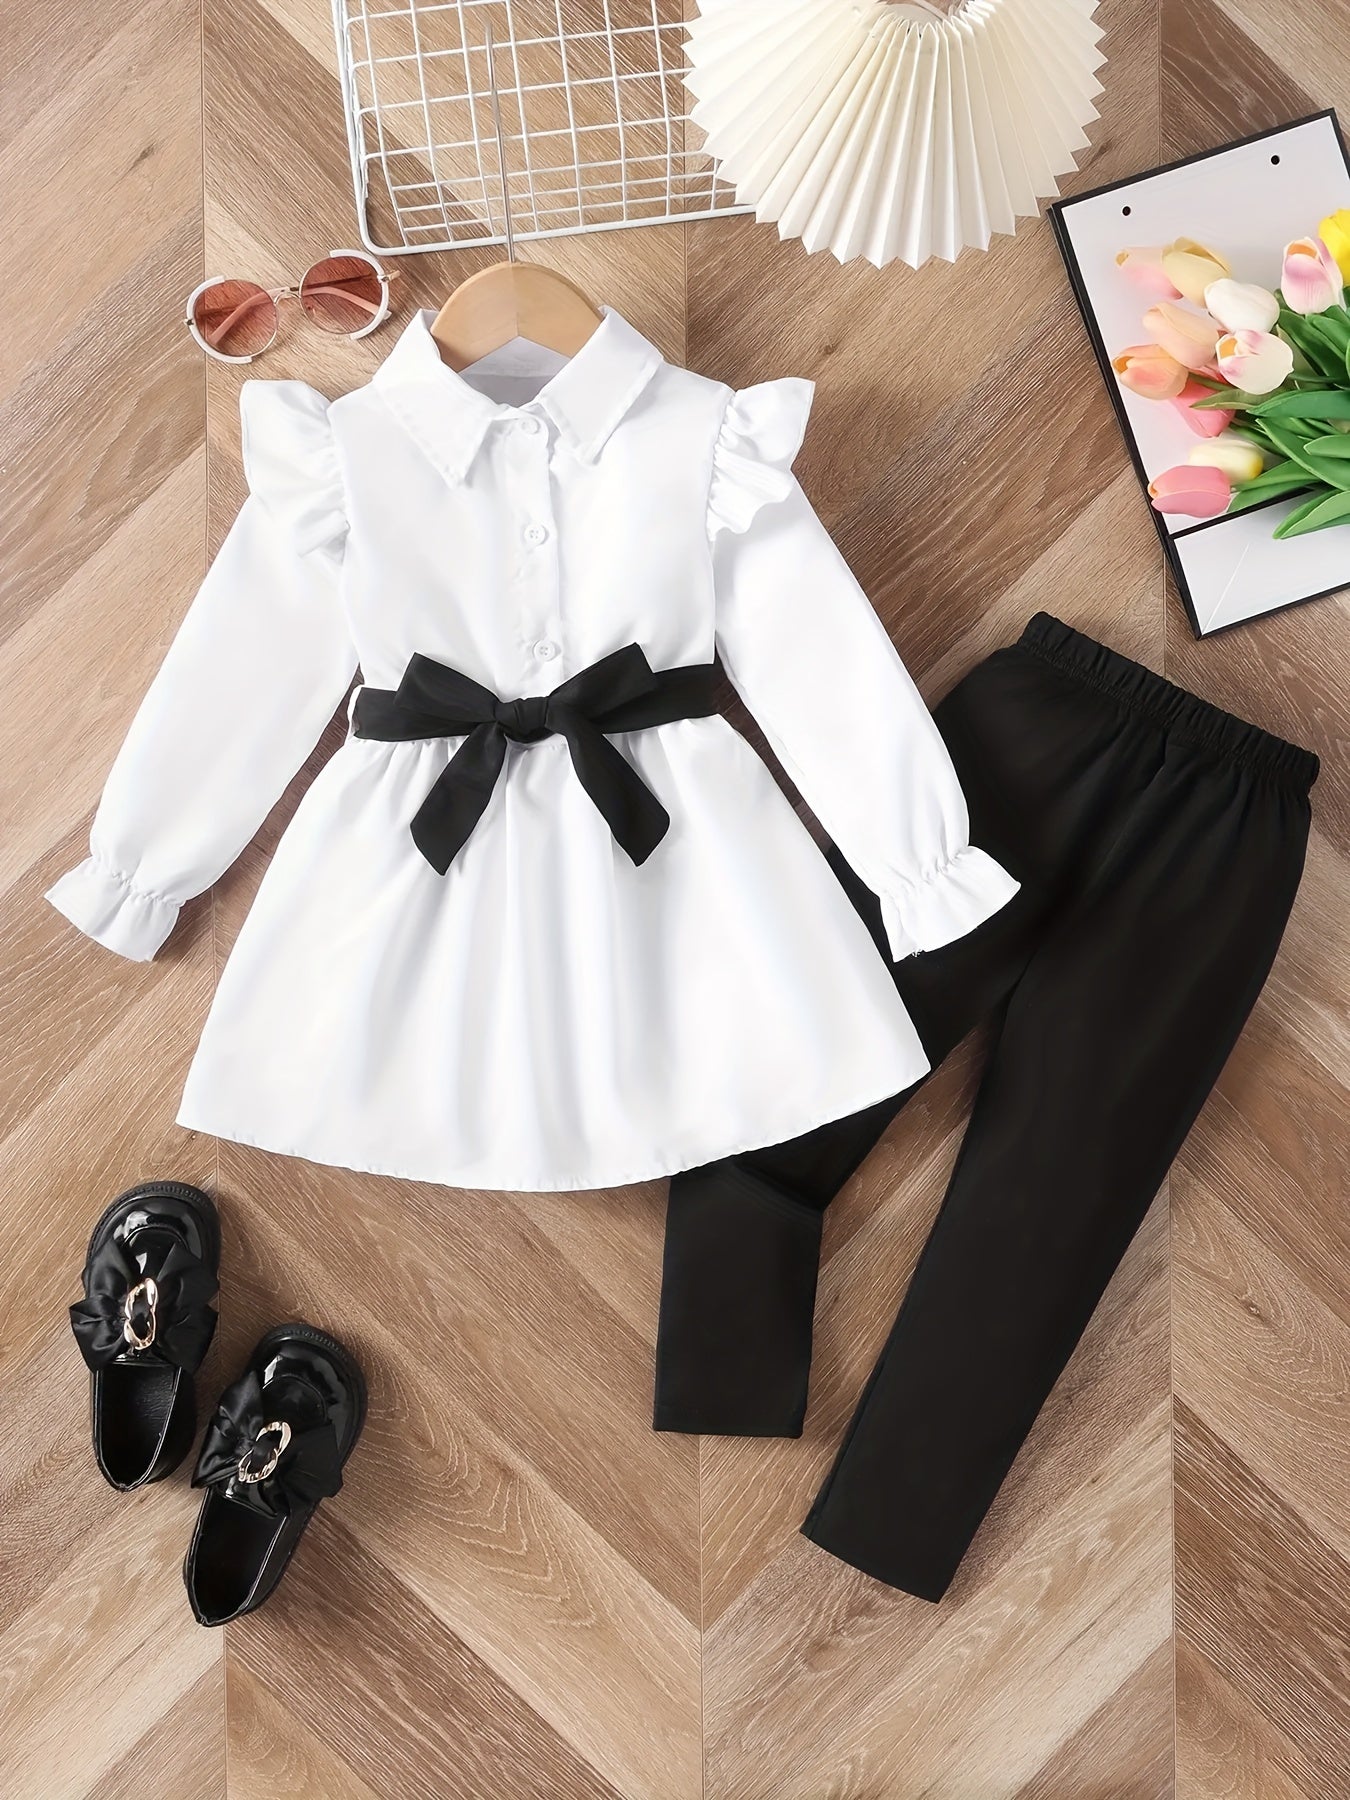 Girl's 2pcs Long Sleeve Shirt With Belt & Pants Set, Ruffle Decor Trendy Casual Outfits, Kids Clothes For Spring Fall